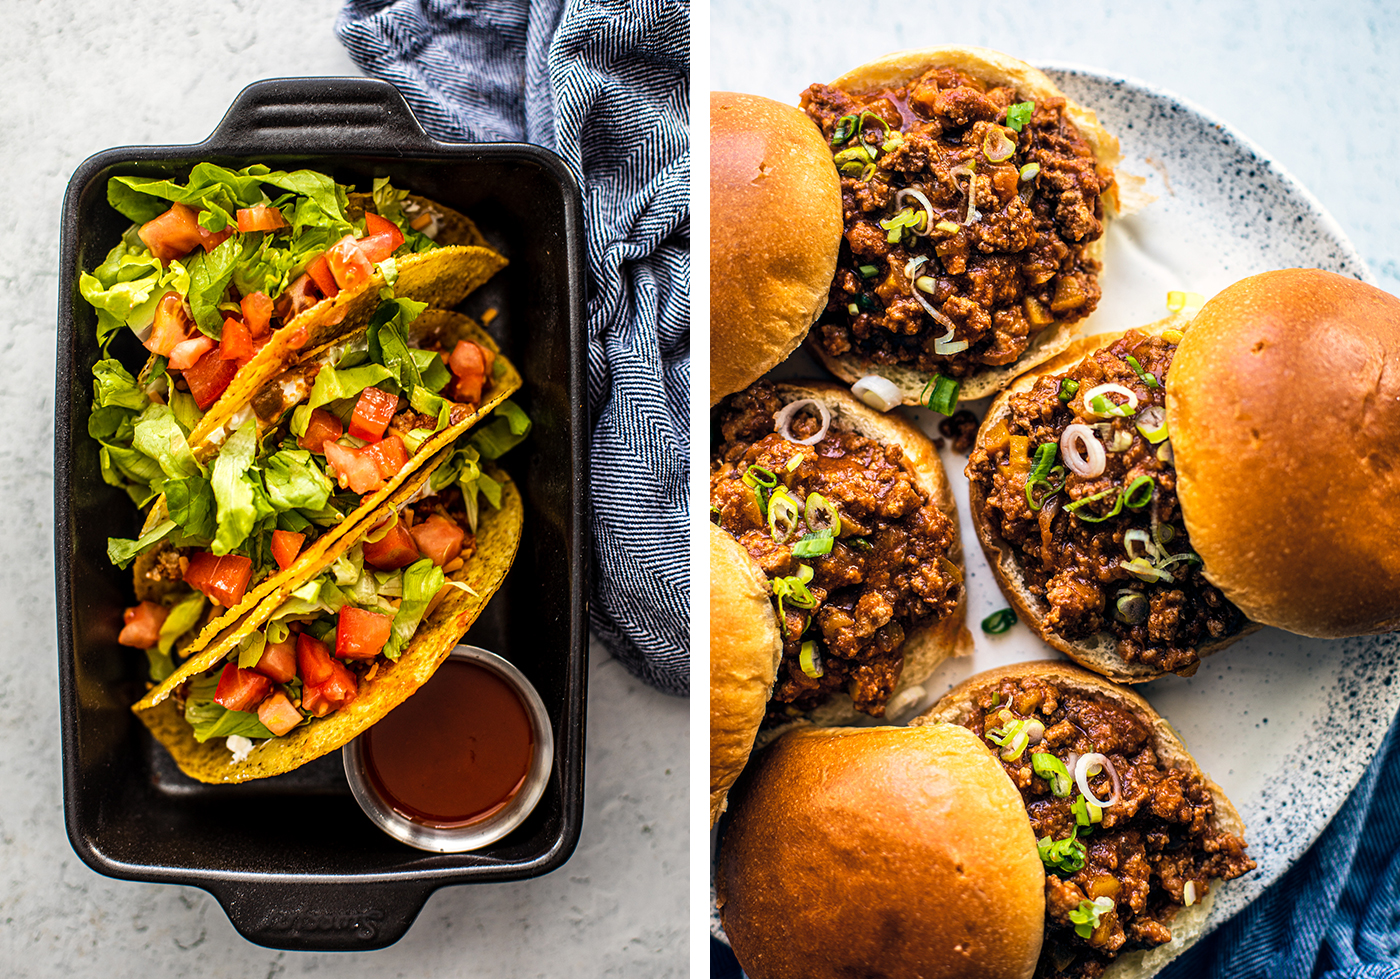 Left: Ground turkey tacos in a black tray; Right: Ground turkey sloppy joes on a serving plate.